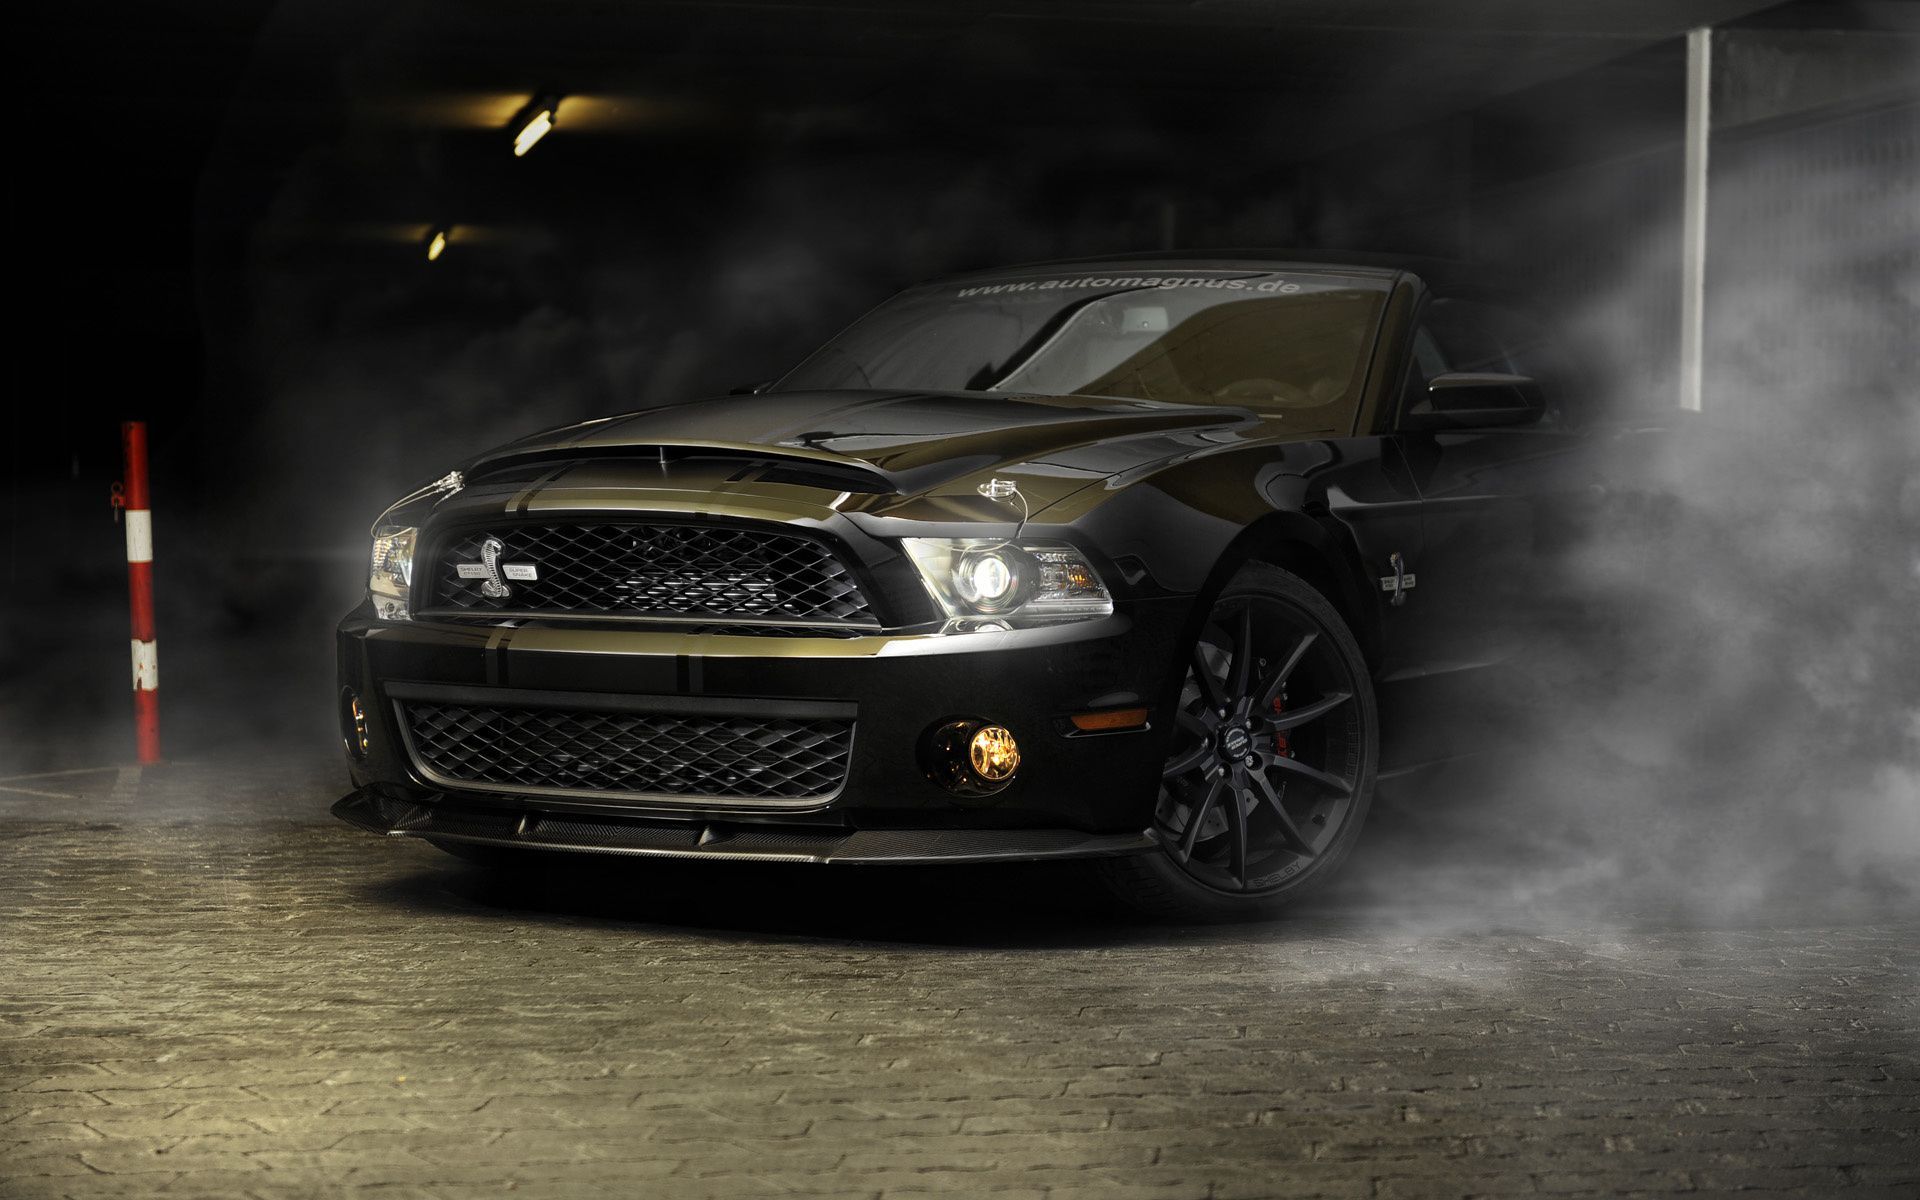 Ford Wallpapers on Pinterest Ford Mustangs, Mustangs and Ford